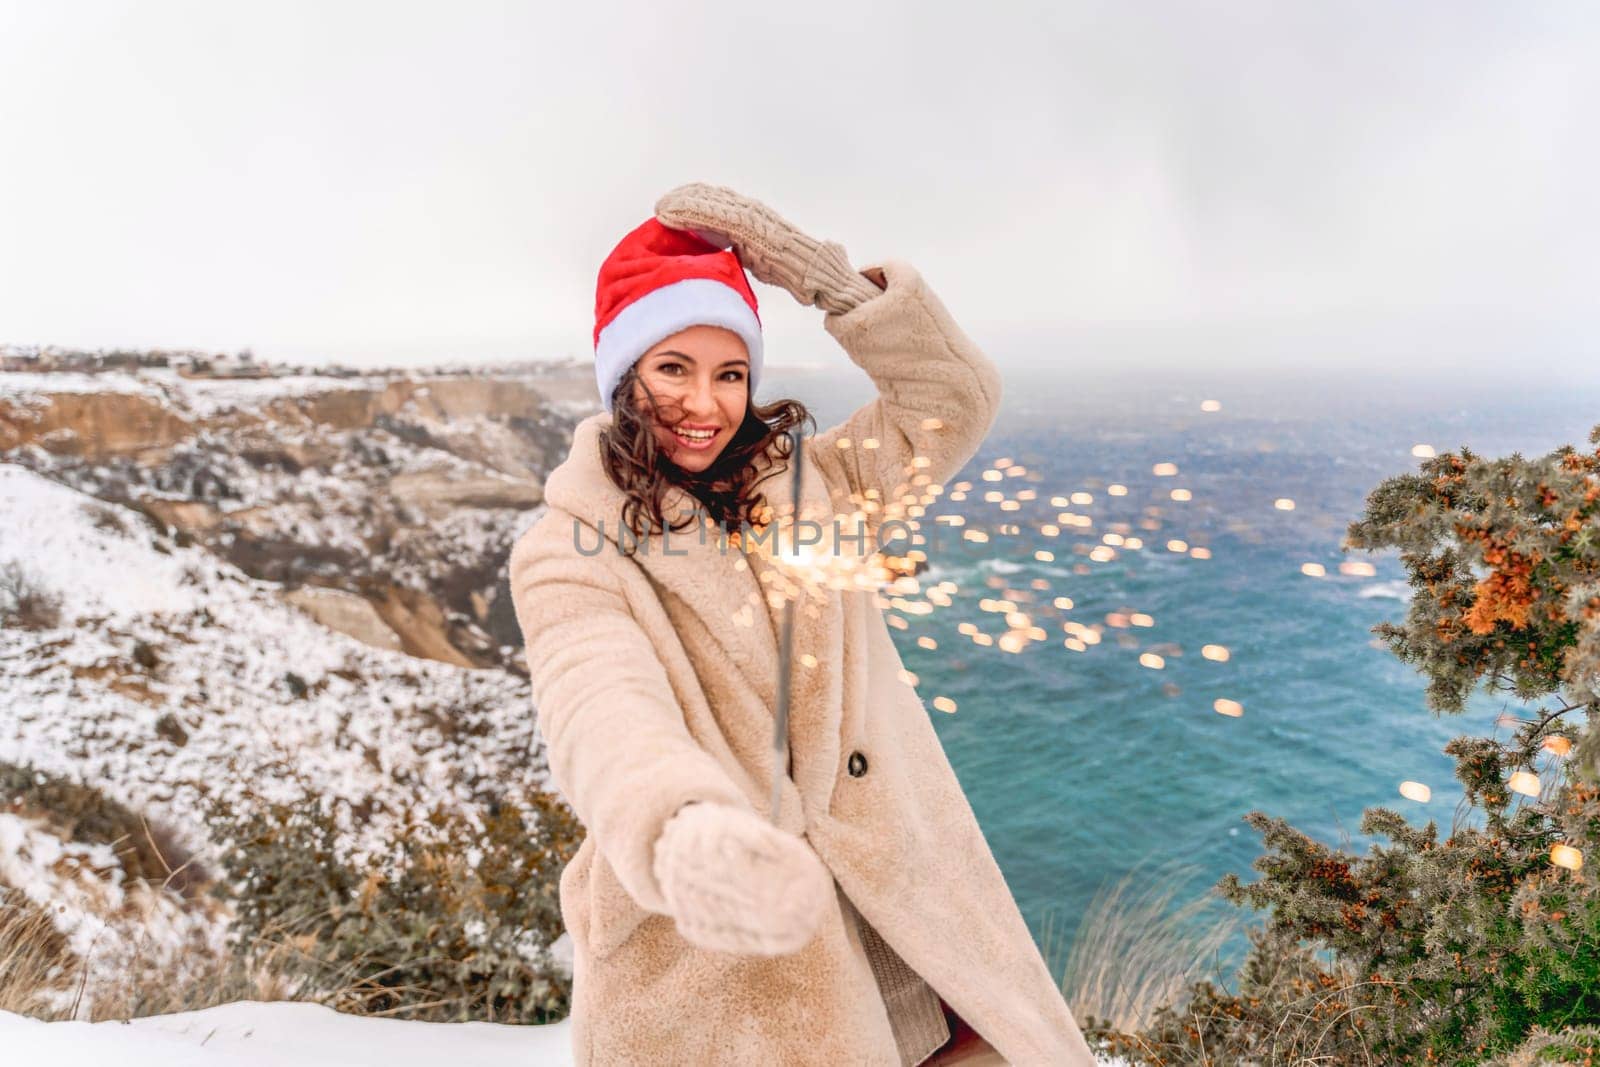 Outdoor winter portrait of happy smiling woman, light faux fur coat holding heart sparkler, posing against sea and snow background.